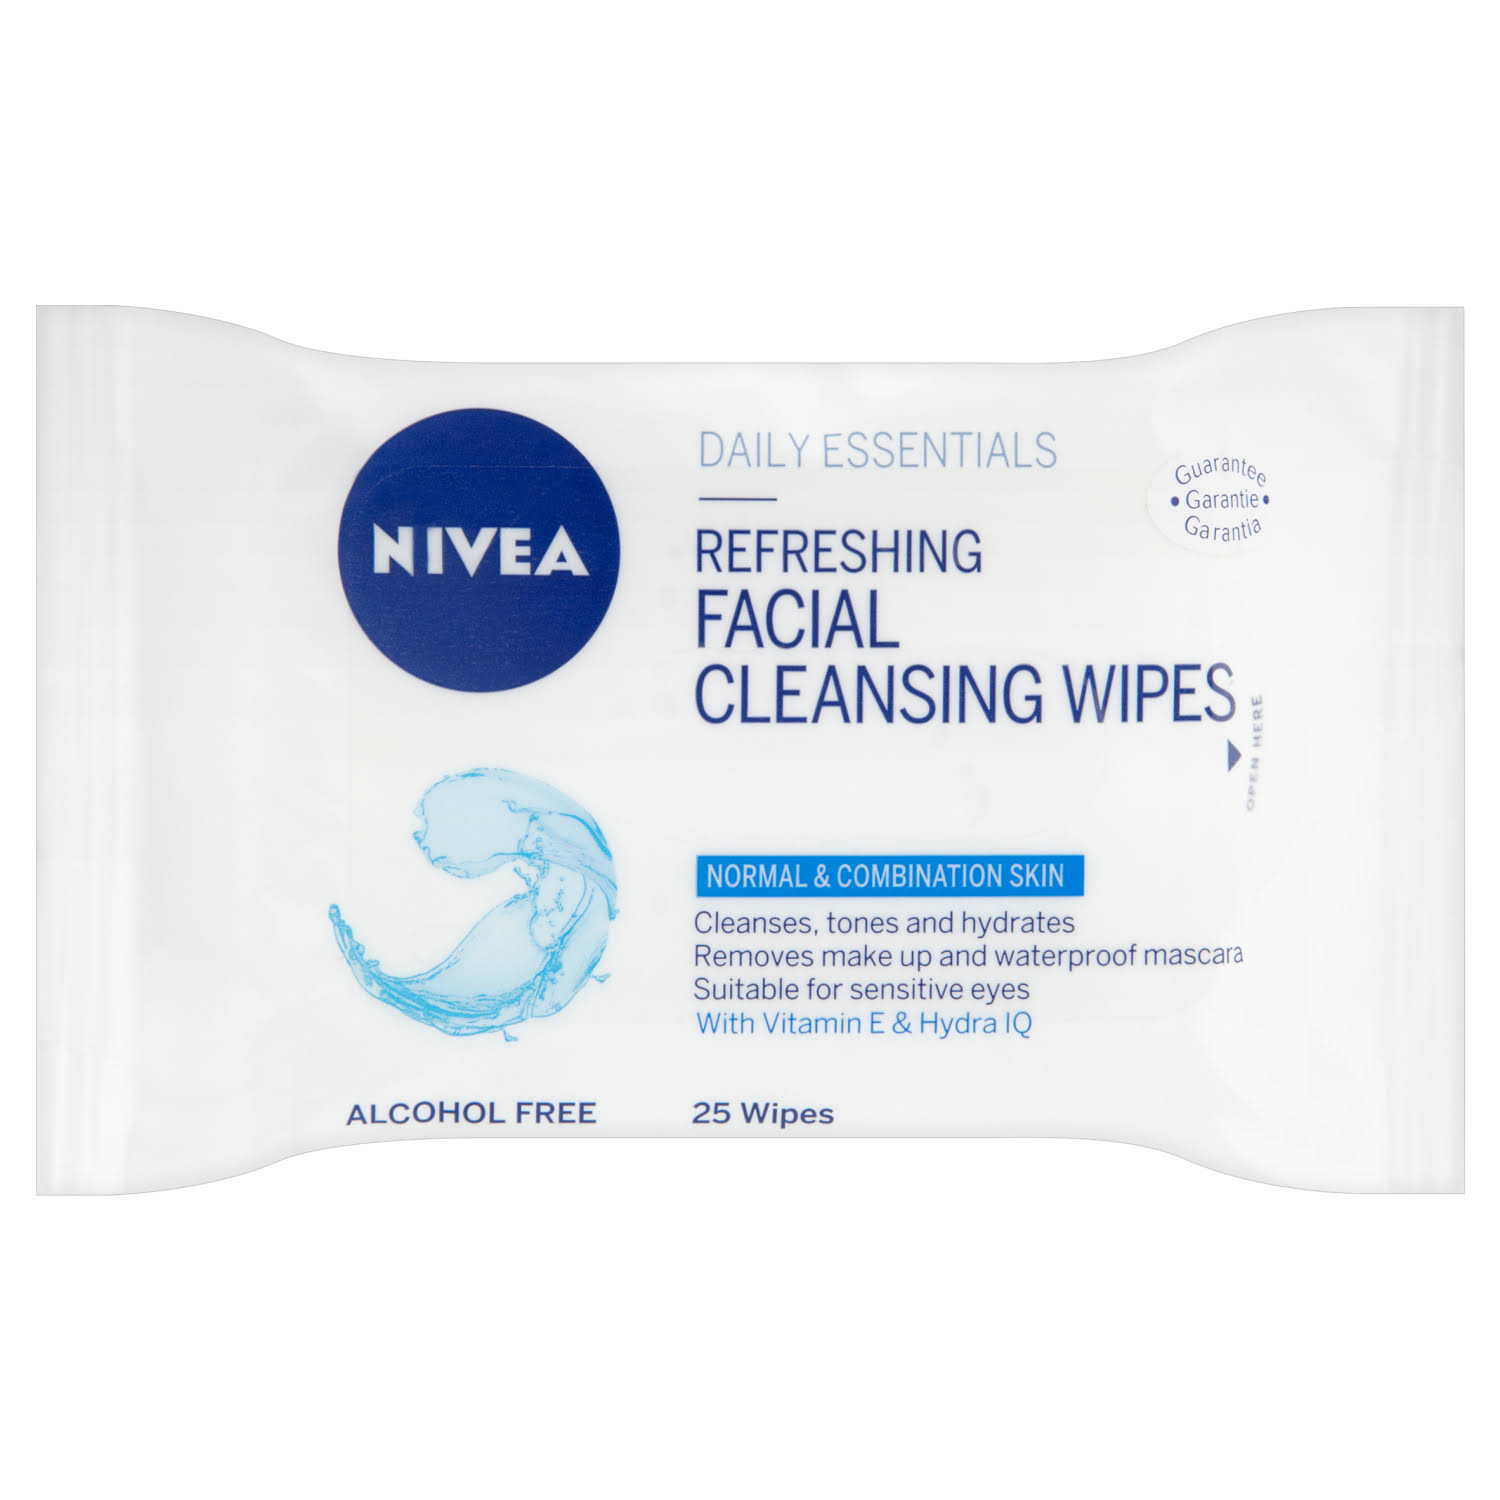 Nivea Daily Essentials 3 in 1 Refreshing Cleansing Wipes - Normal Skin, 25 Wipes